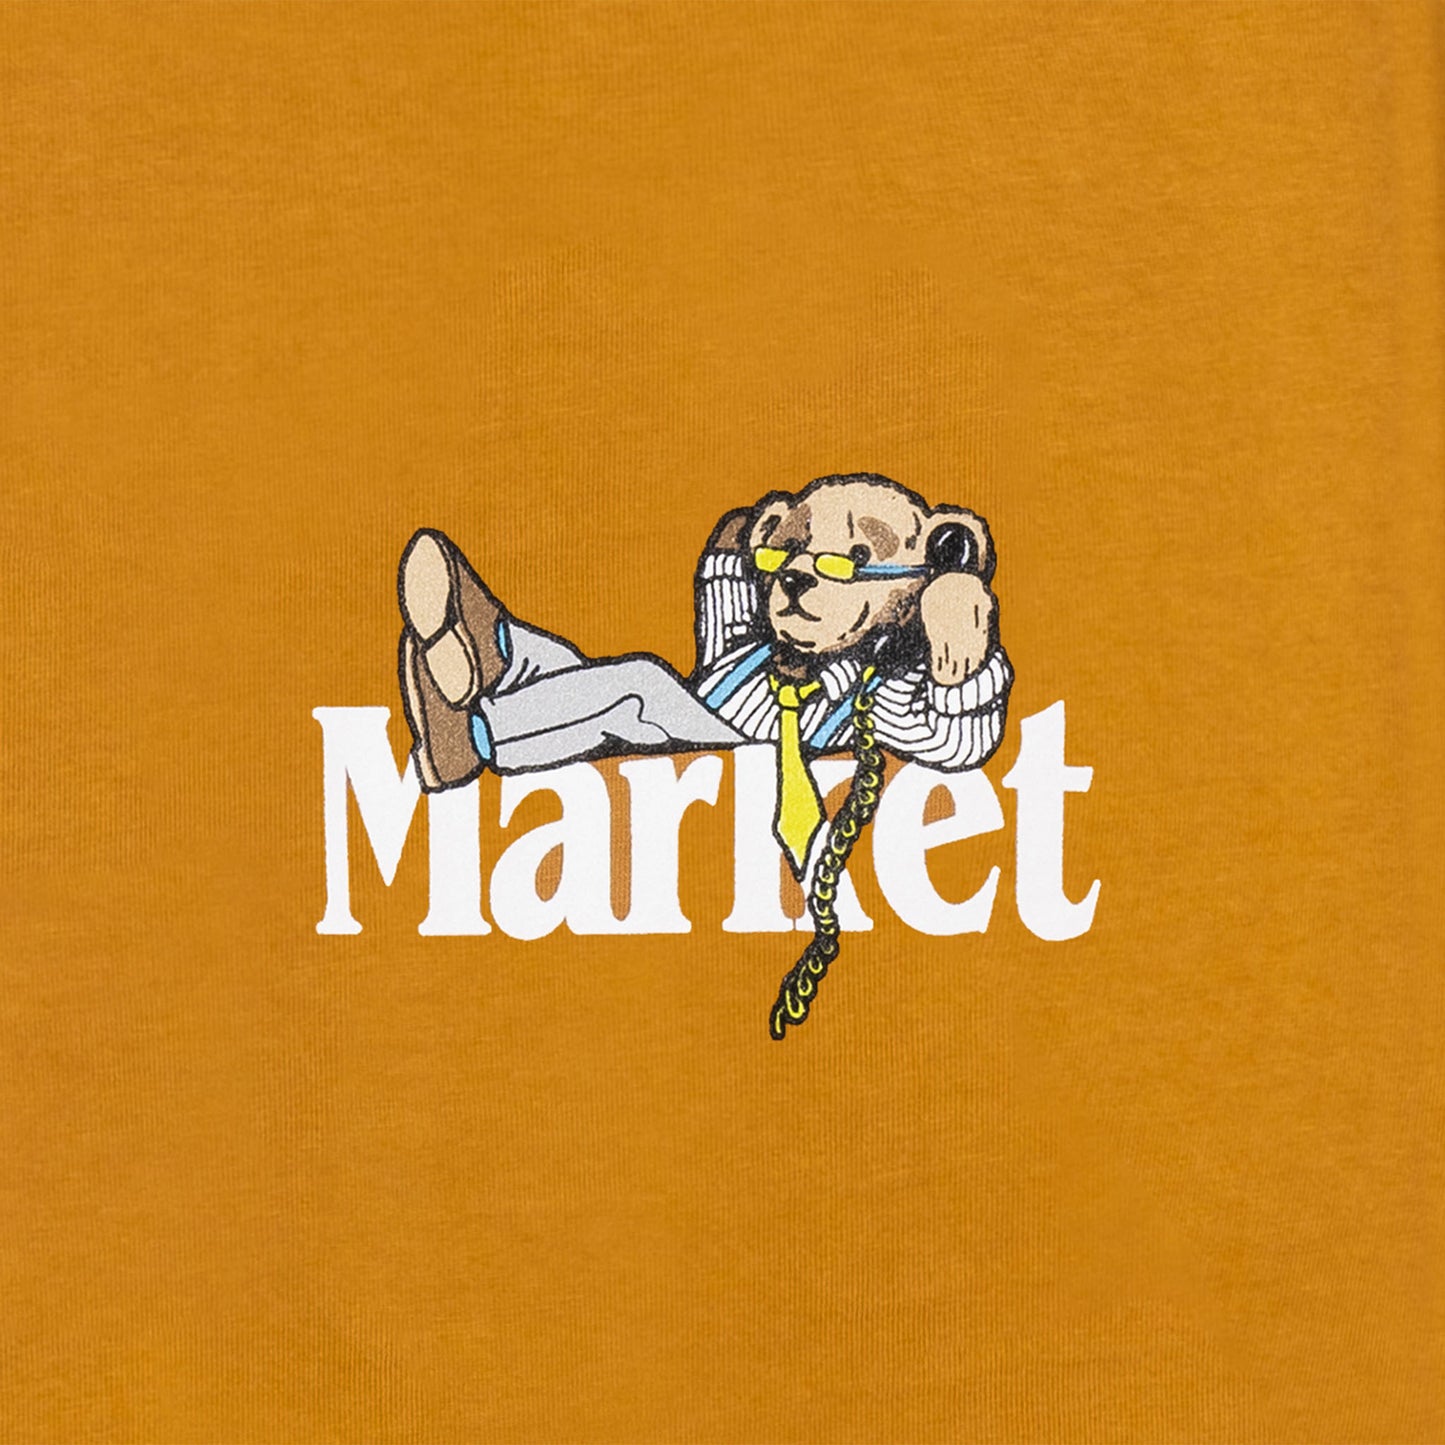 MARKET clothing brand BETTER CALL BEAR T-SHIRT. Find more graphic tees, hats, hoodies and more at MarketStudios.com. Formally Chinatown Market.